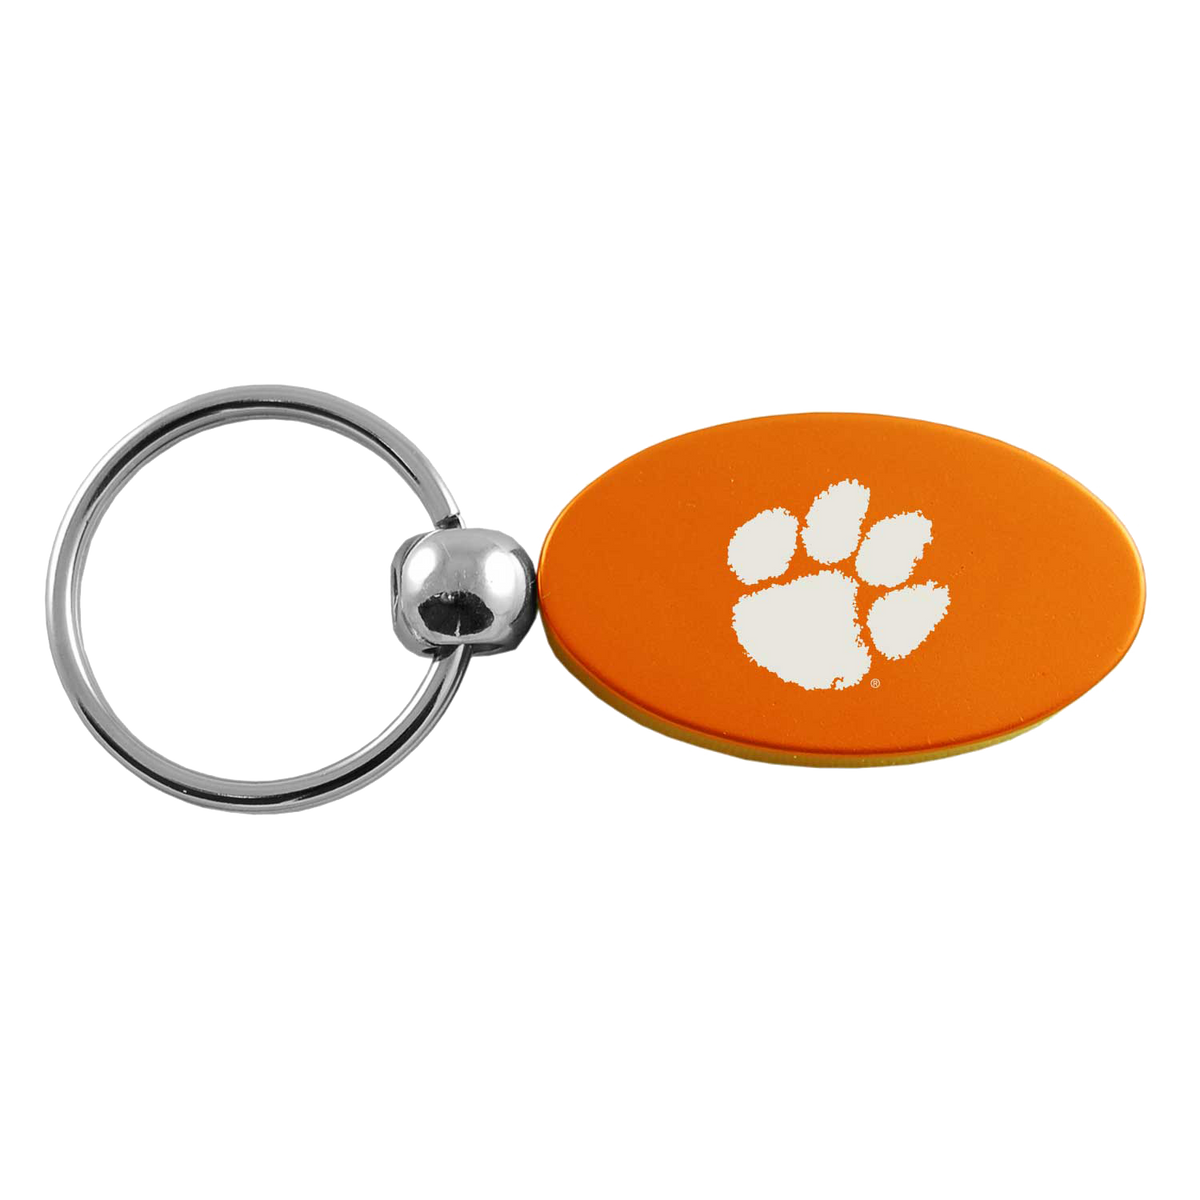 Clemson Oval Colored Key Chain with Paw